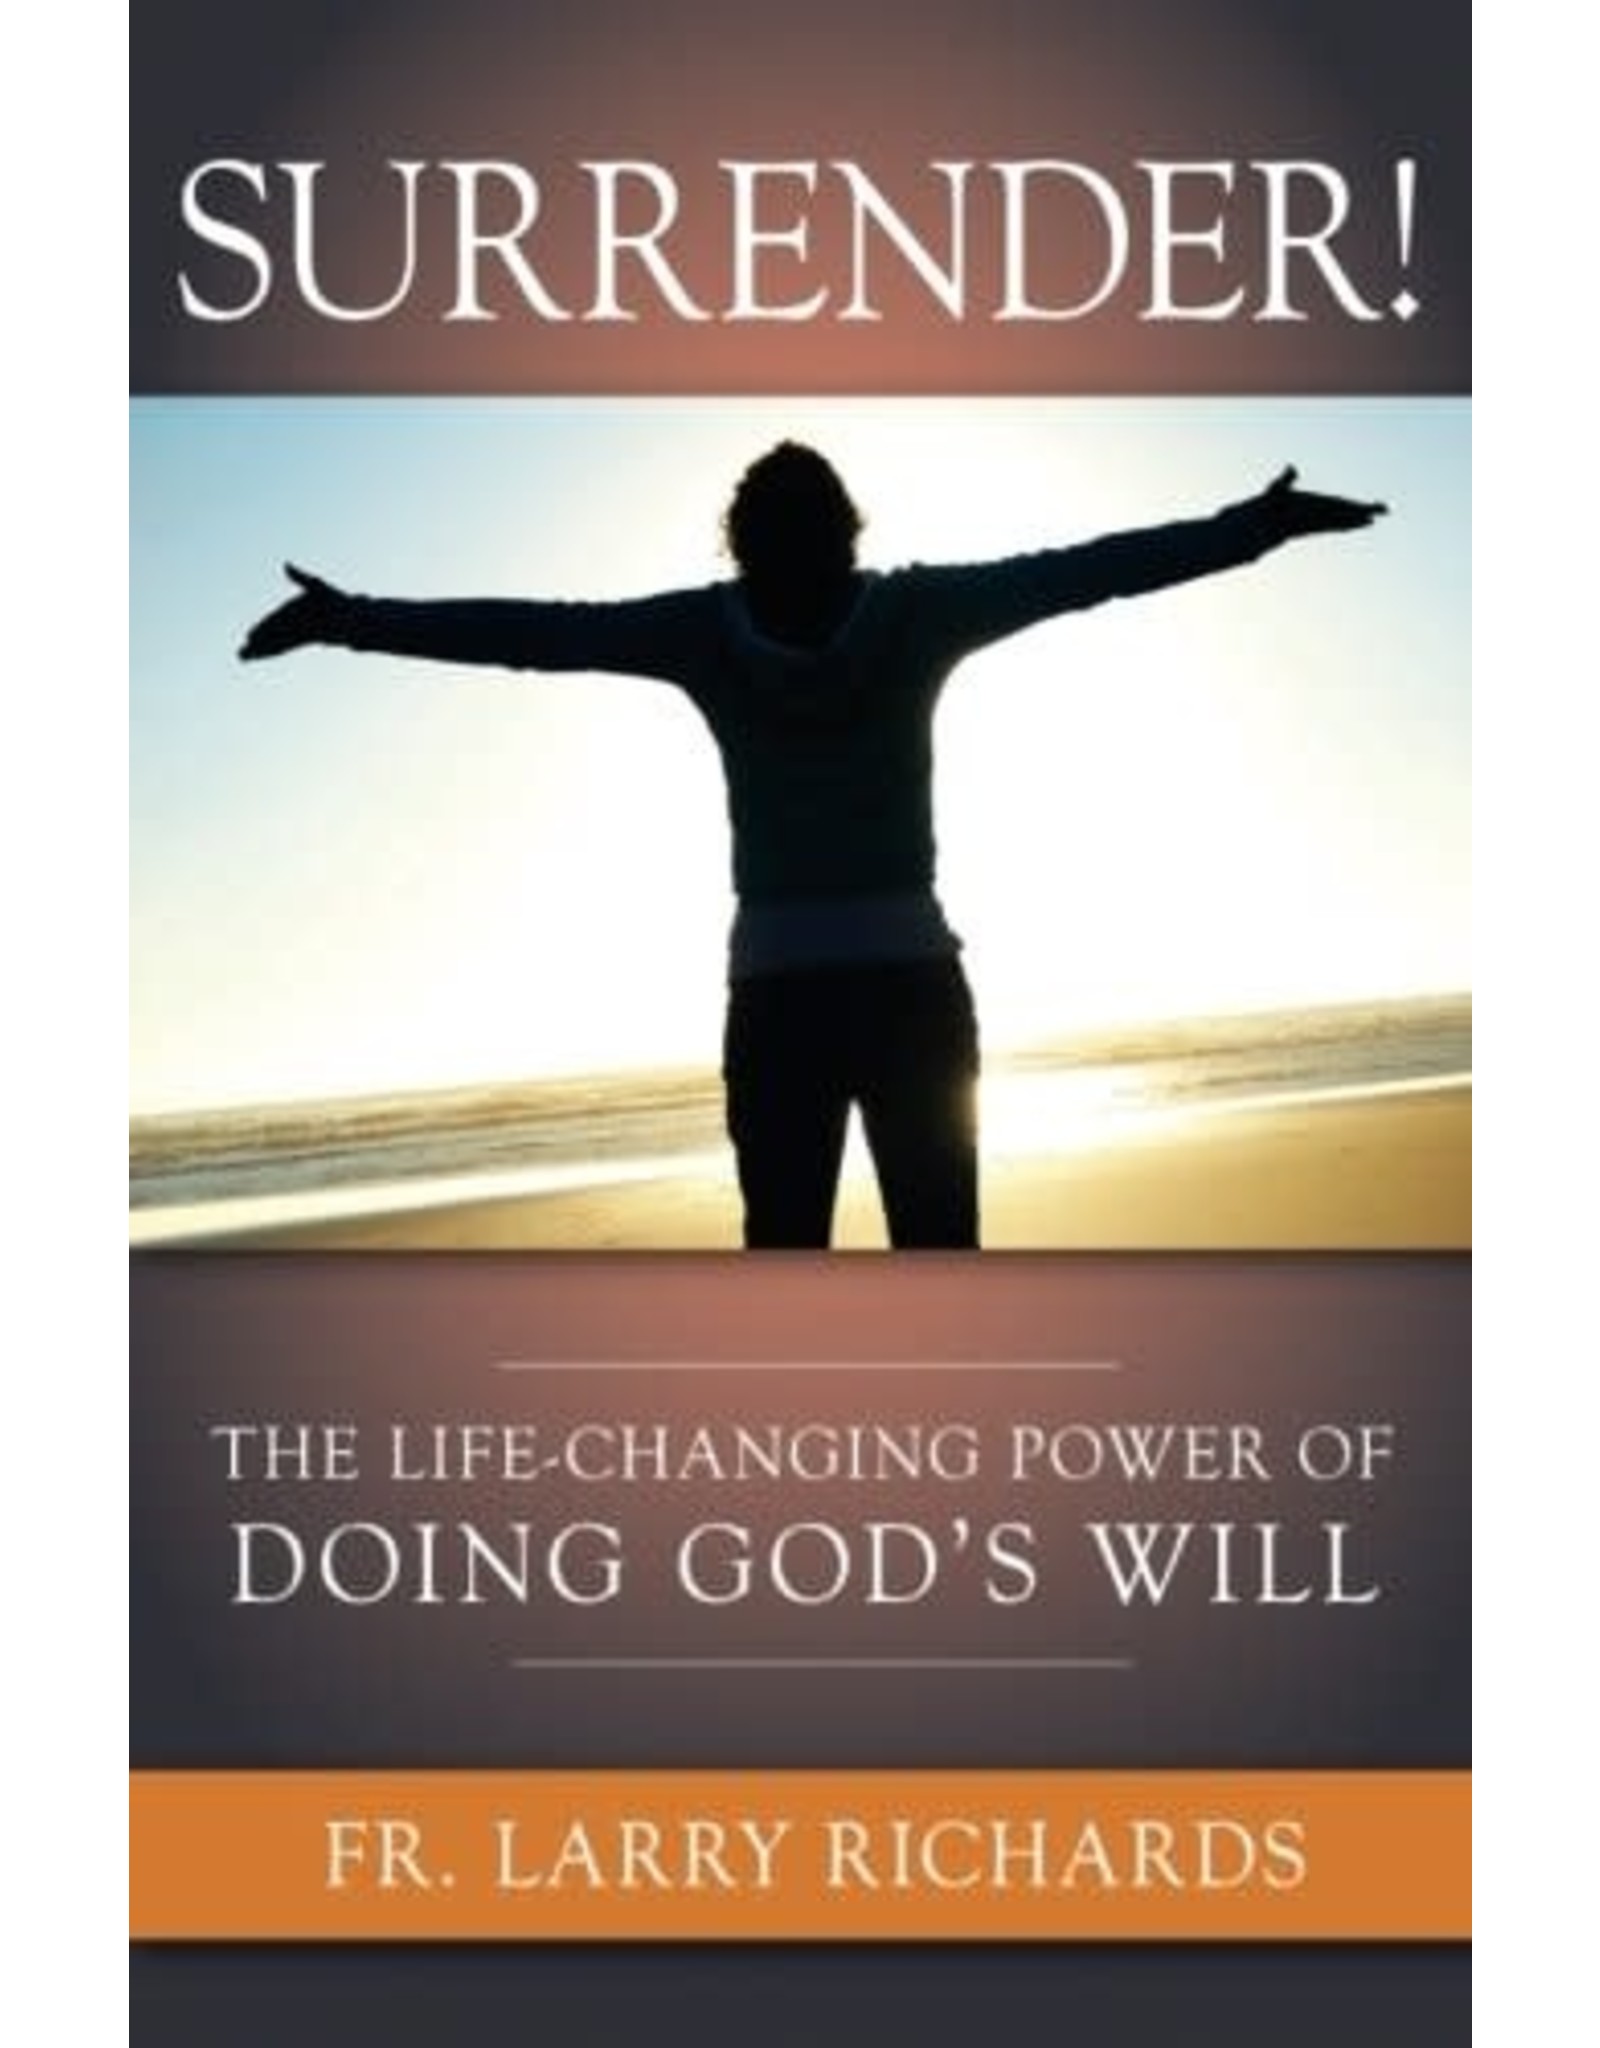 Surrender! The Life-Changing Power of Doing God's Will